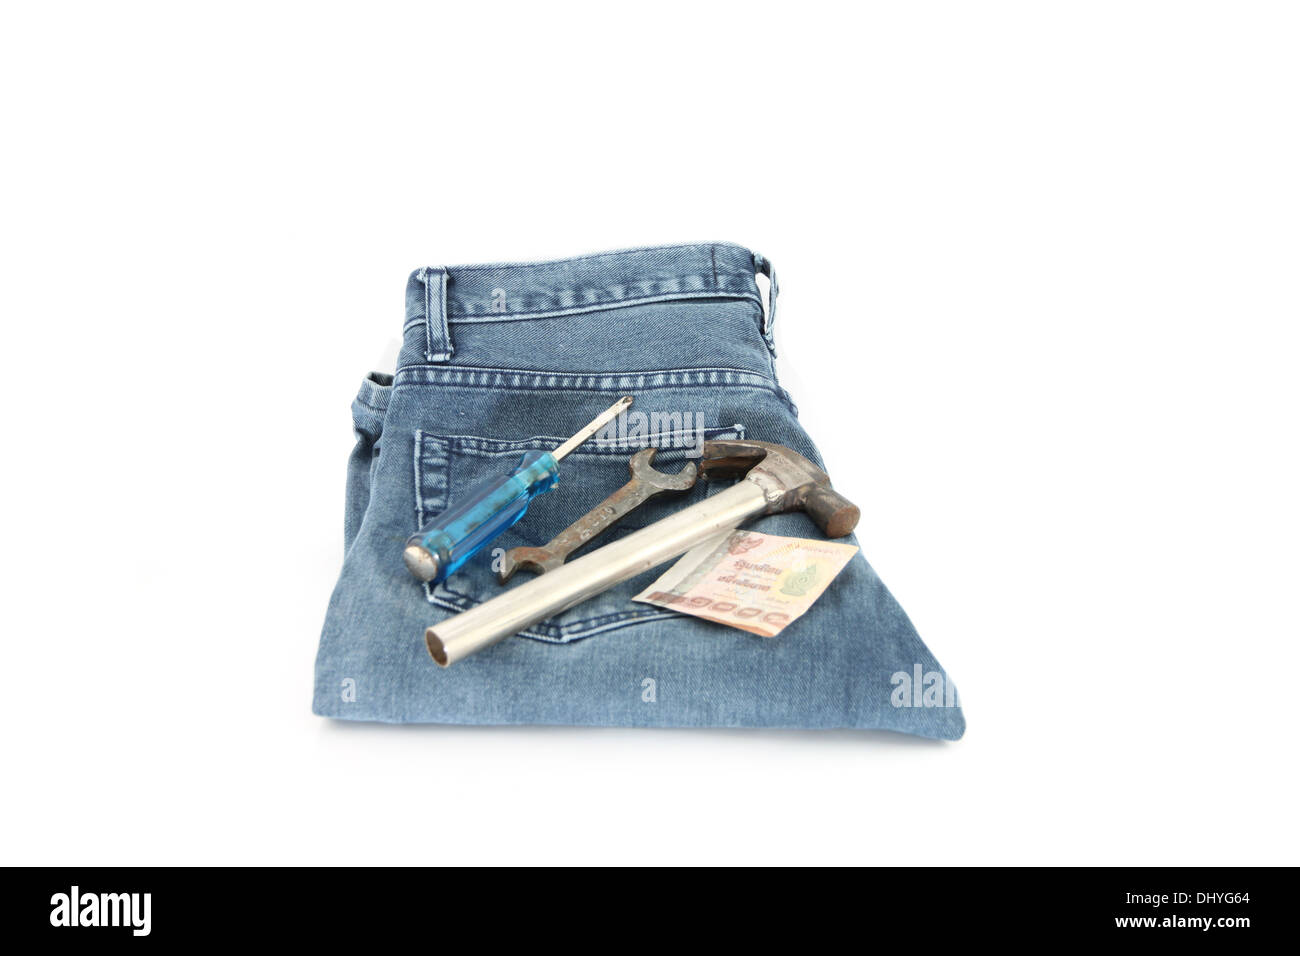 Blue Jeans,Tools and money on white background. Stock Photo